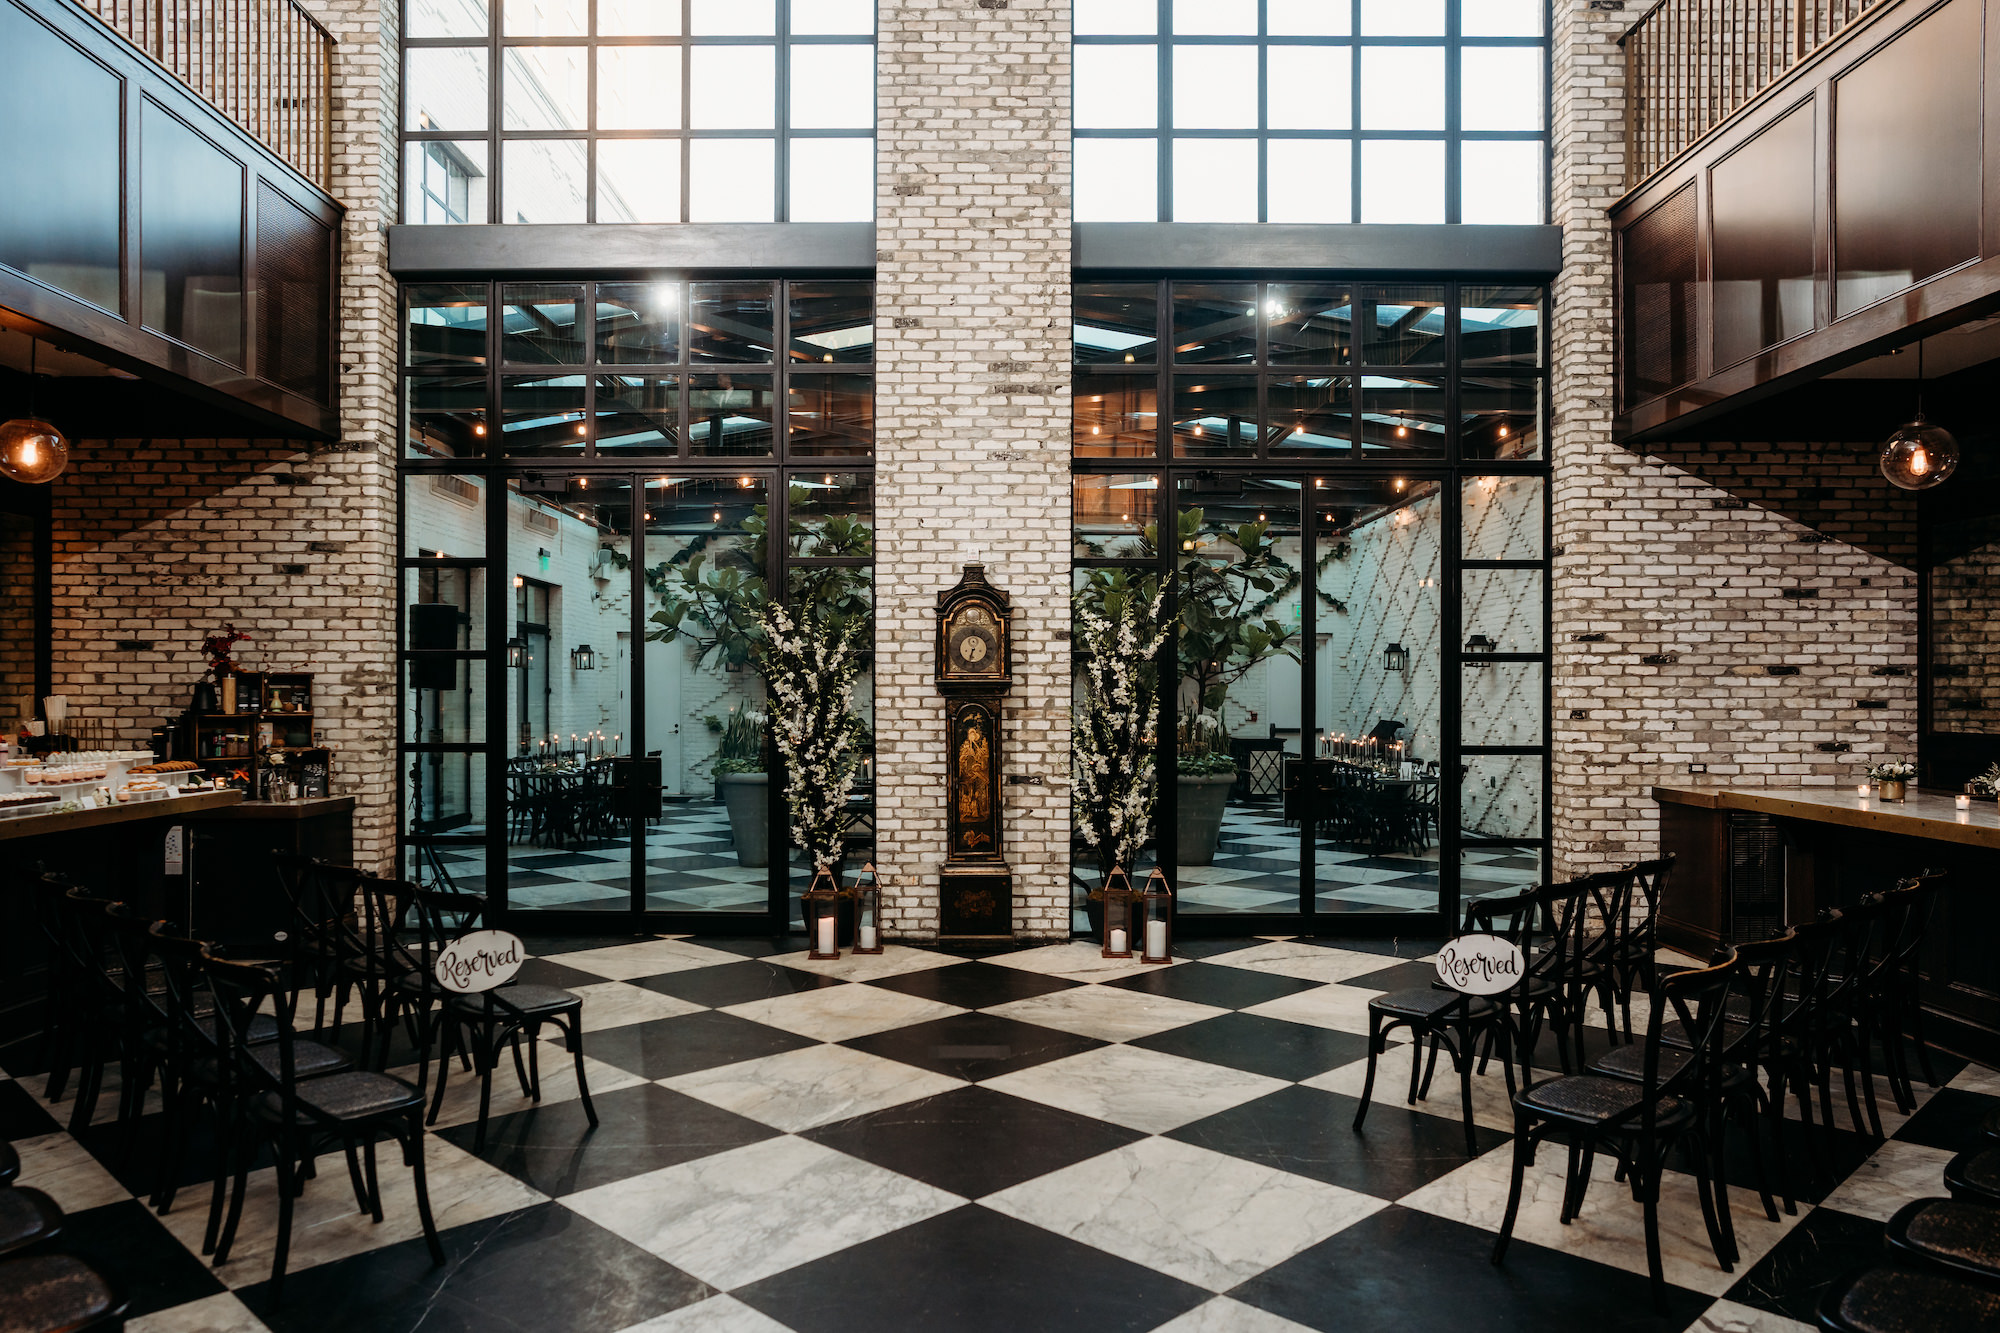 Timeless Indoor Wedding Ceremony with Black Chairs and Checkered Floor | Venue Oxford Exchange | Tampa Florida Event Planner Special Moments